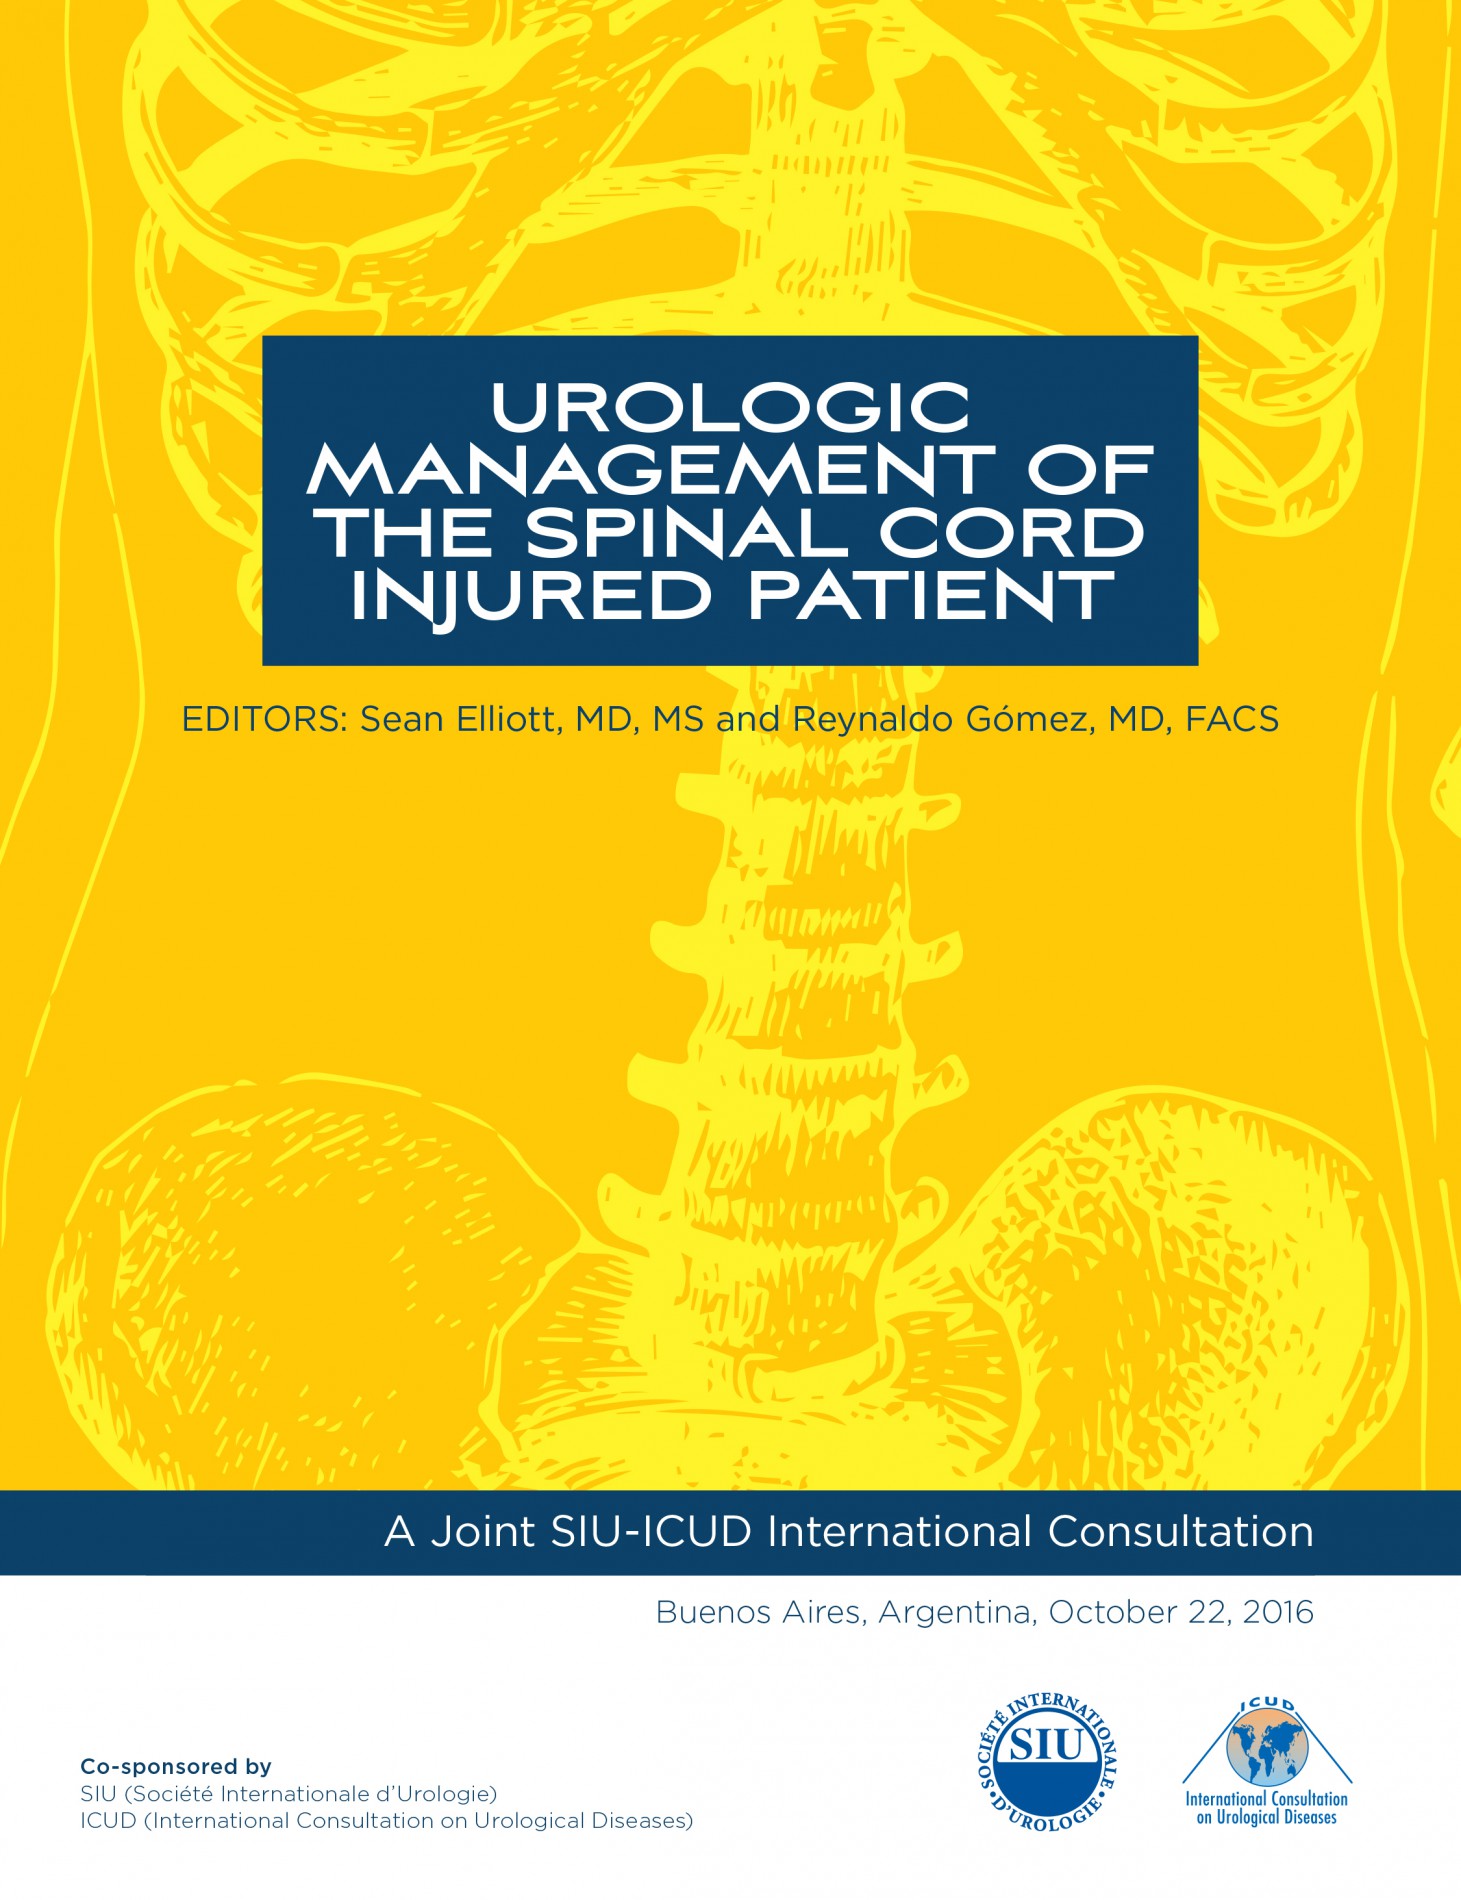 Urologic Management of the Spinal Cord Injured Patient (2016)